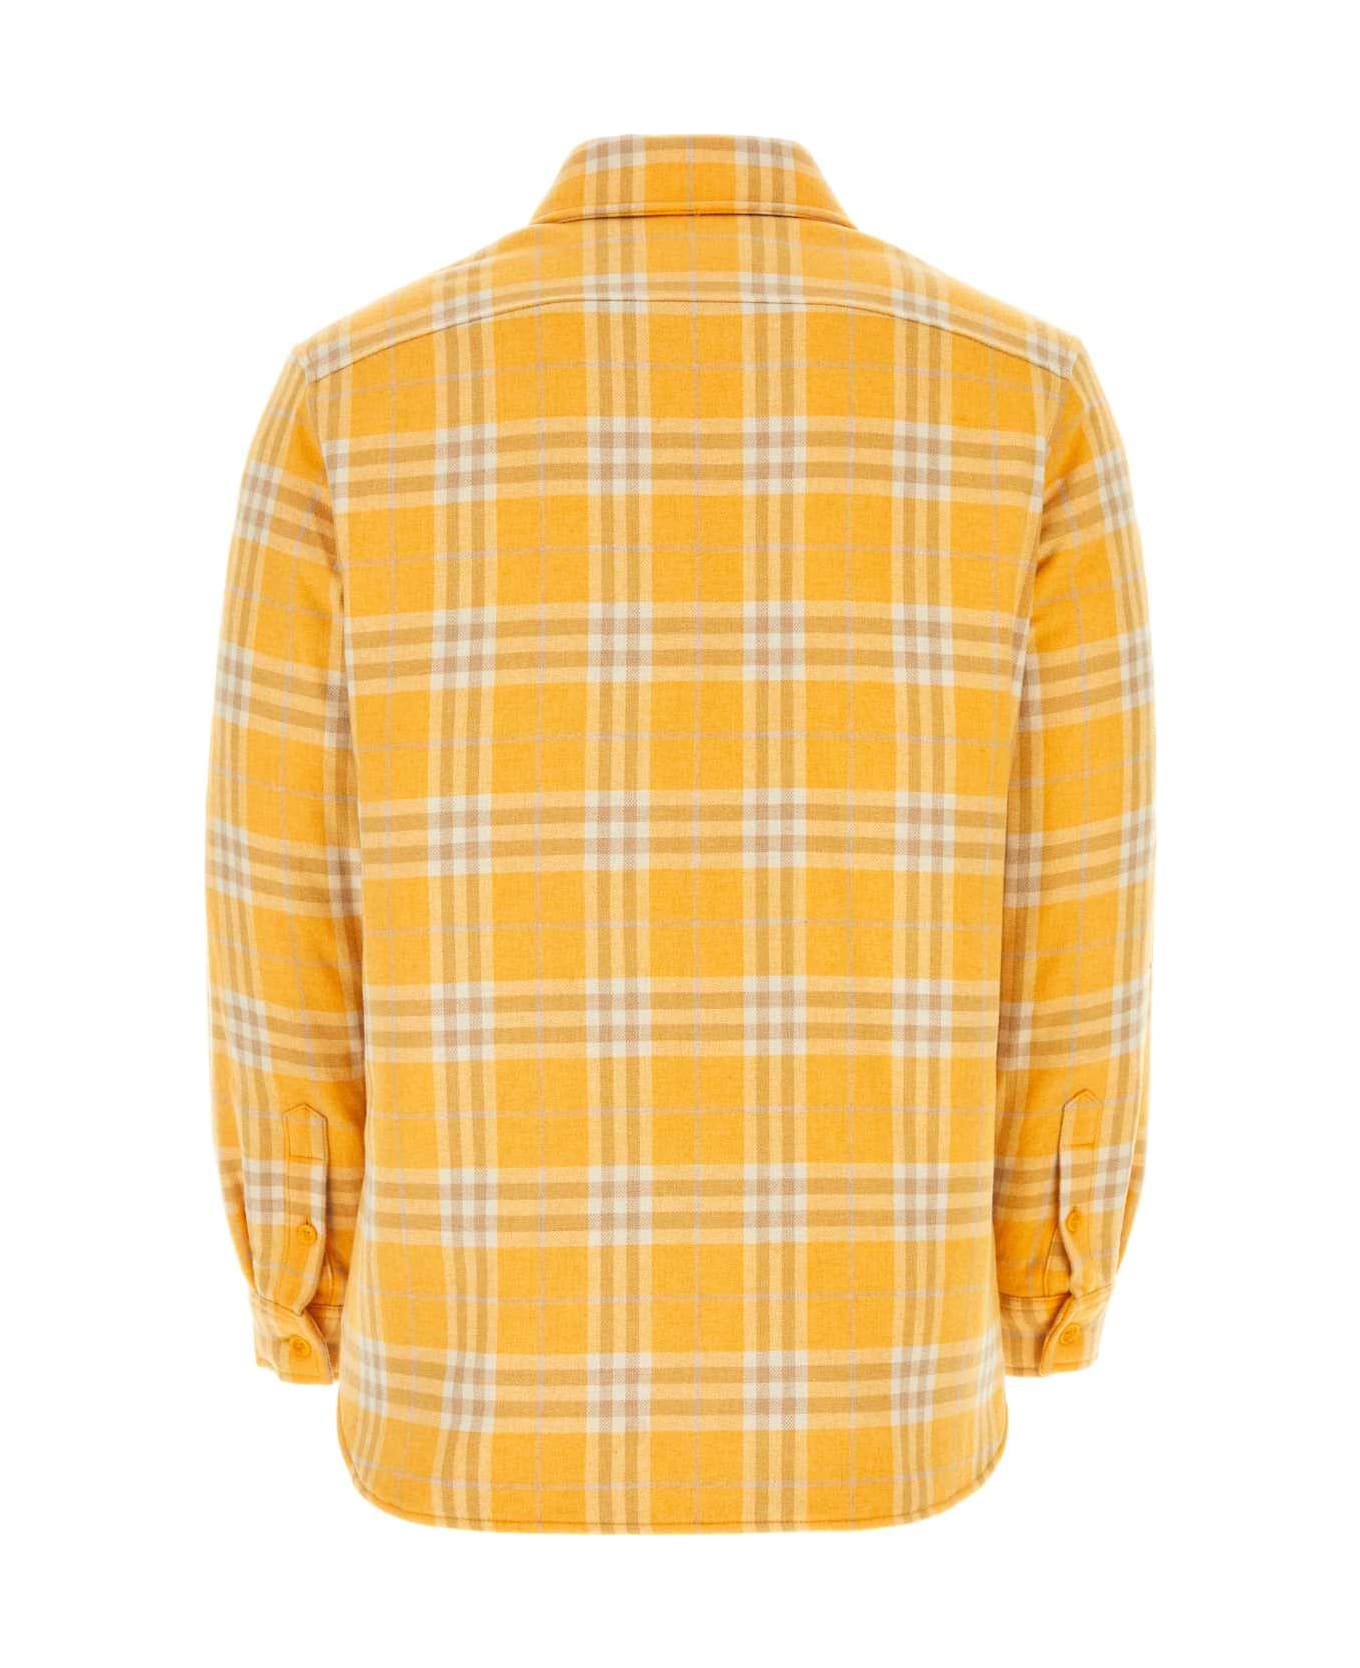 Burberry Embroidered Flannel Oversize Shirt - MARIGOLDIPCHECK シャツ